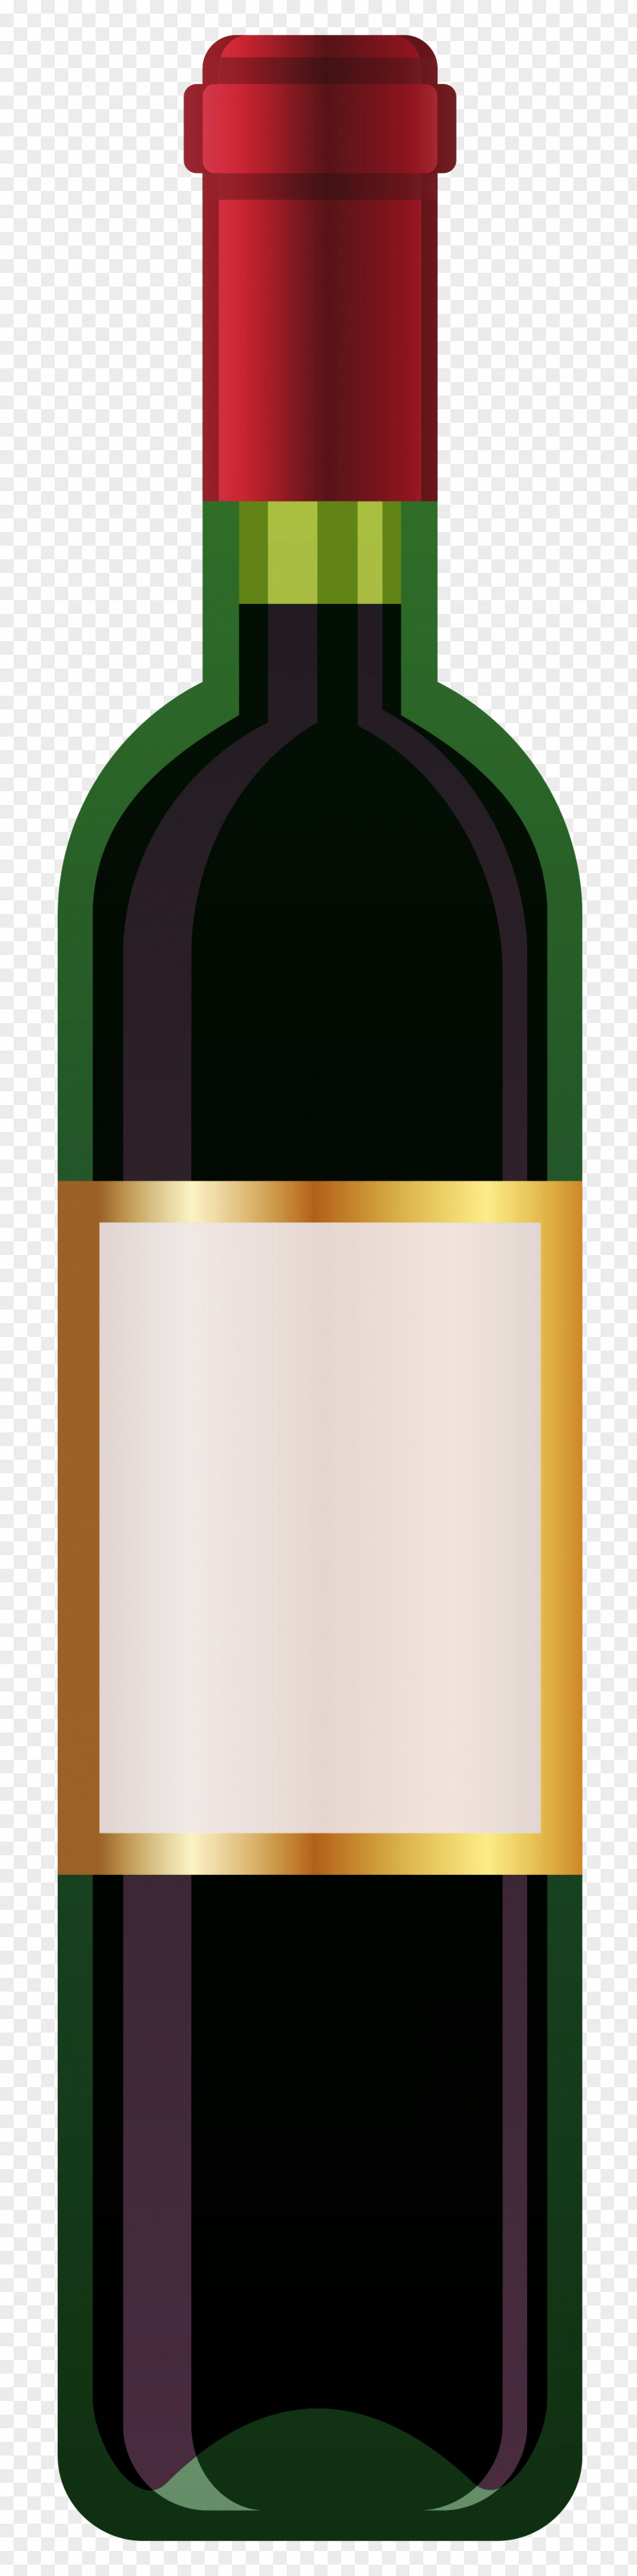 Wine Bottle Red White Champagne Burgundy PNG